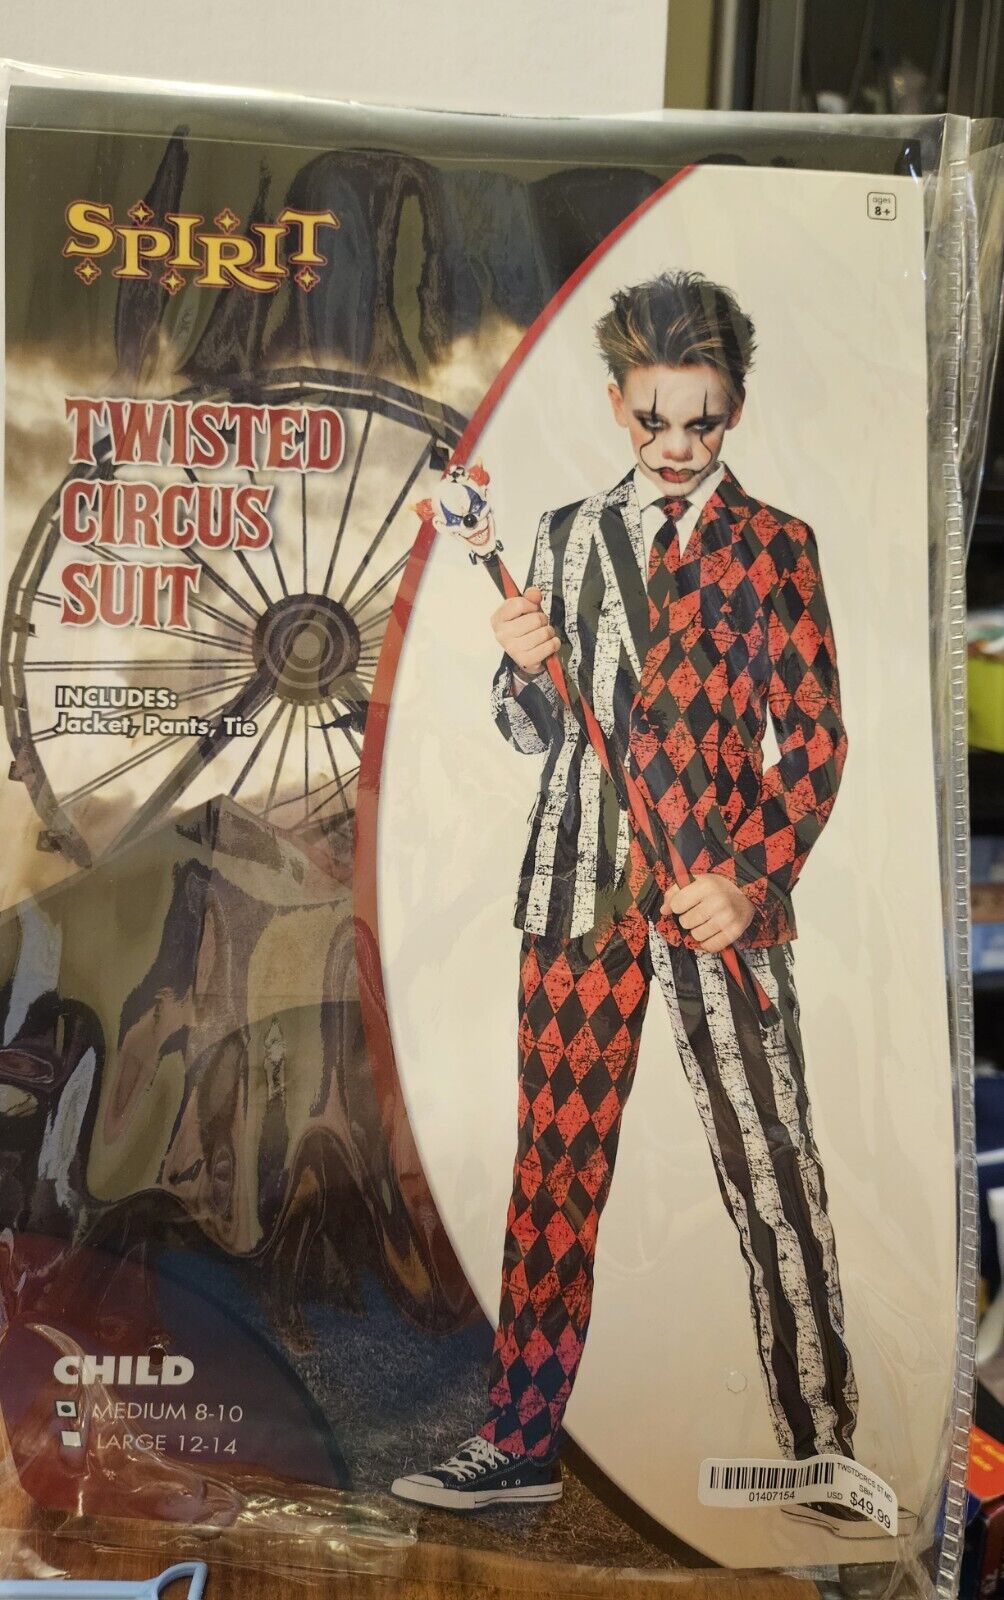 Twisted Circus Suit Costume - image 1